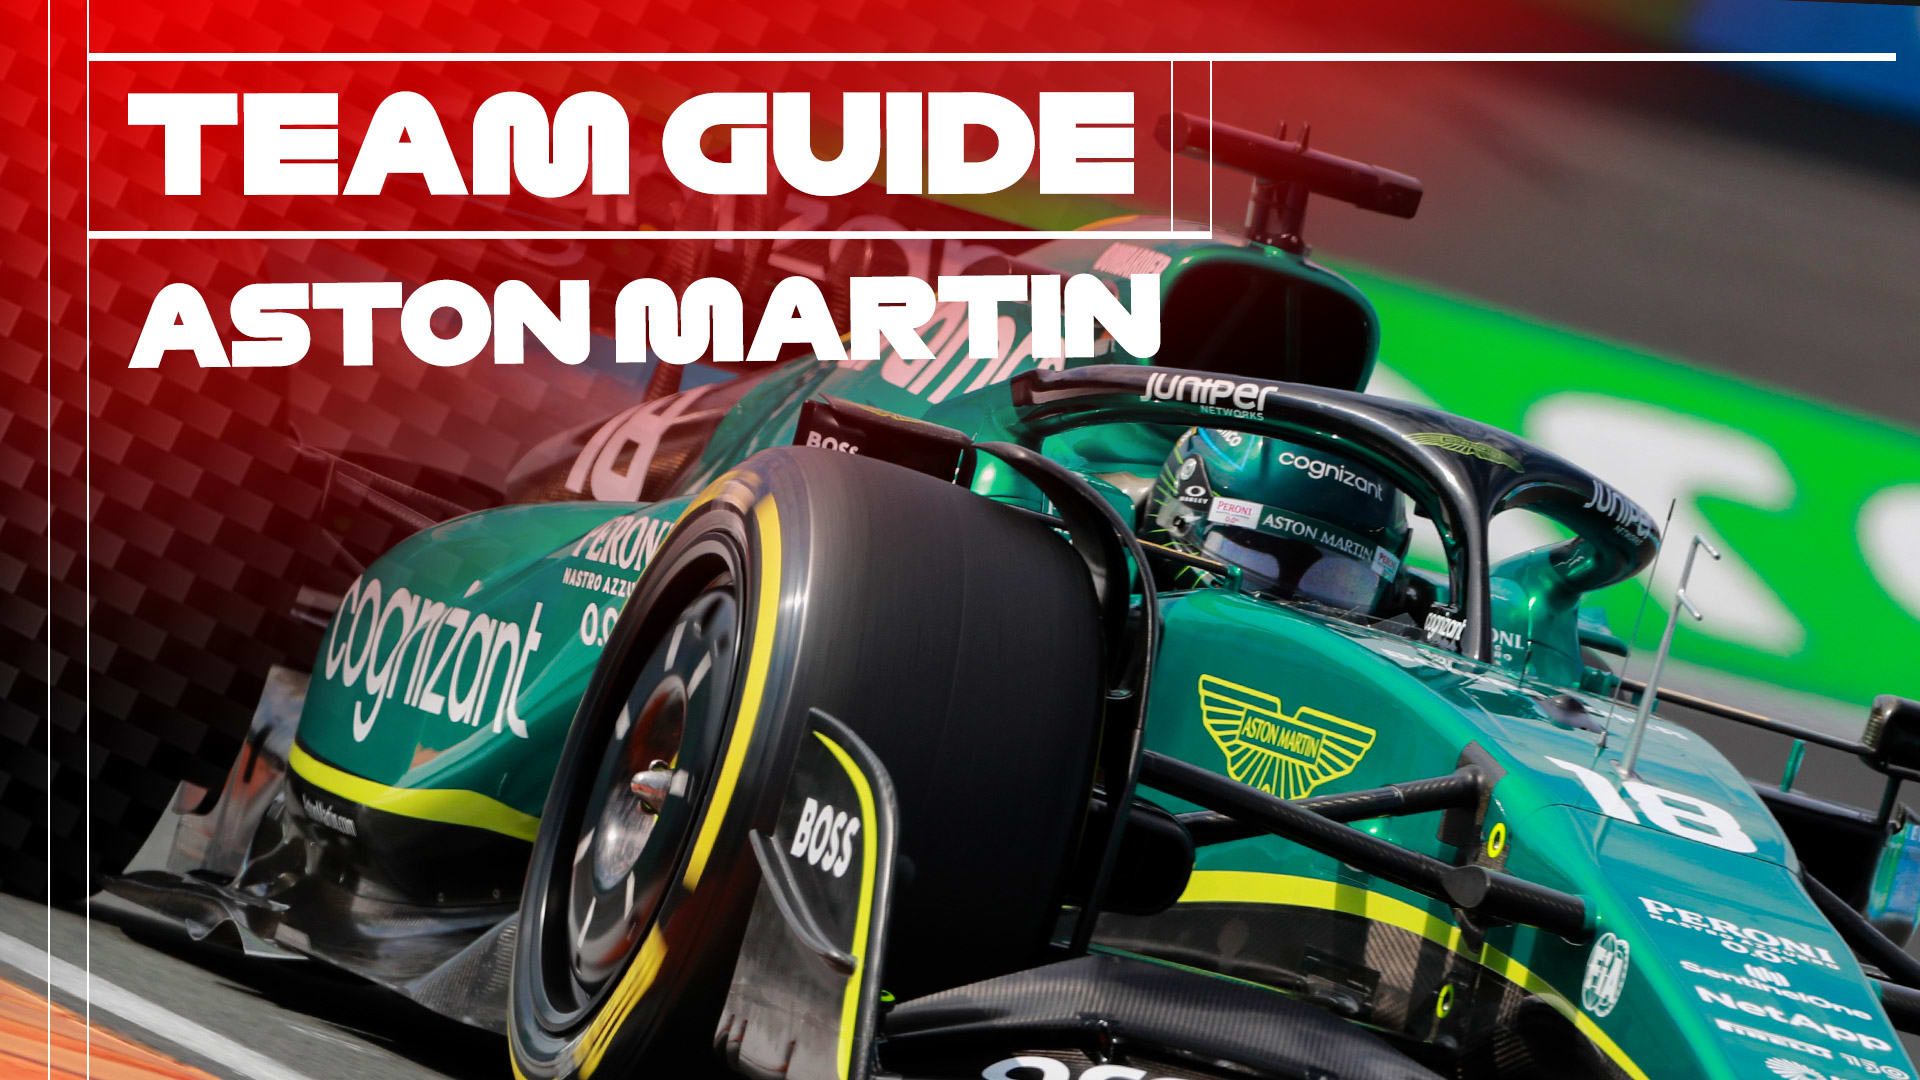 F1: Championship Standings 2018 and Team Guide Sportlive